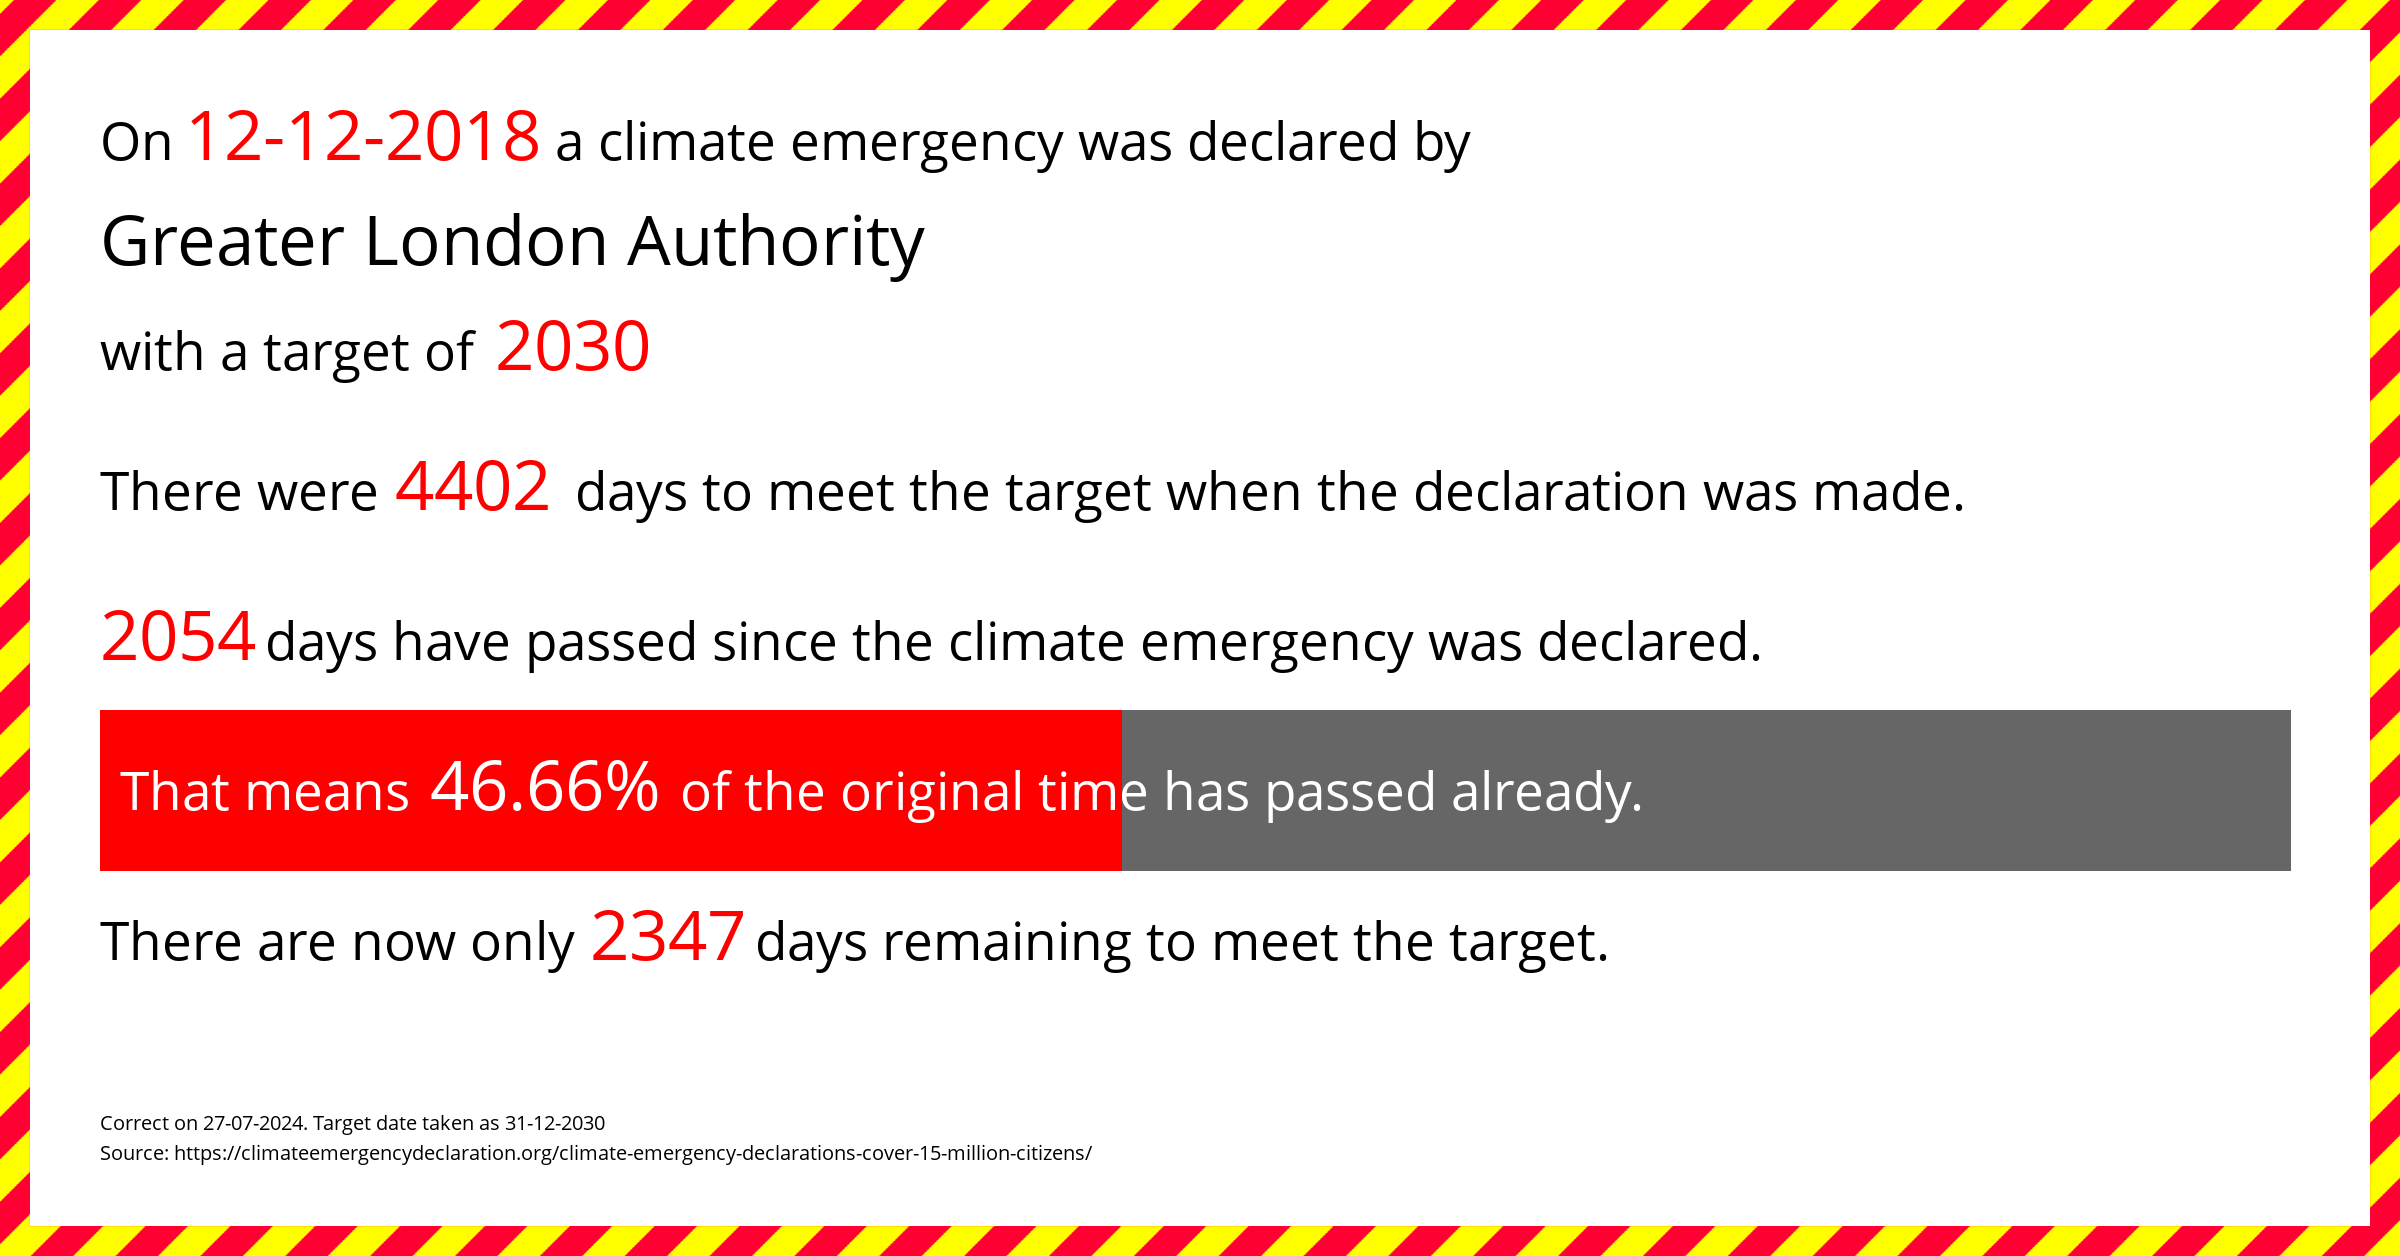 Greater London Authority declared a Climate emergency on Wednesday 12th December 2018, with a target of 2030.